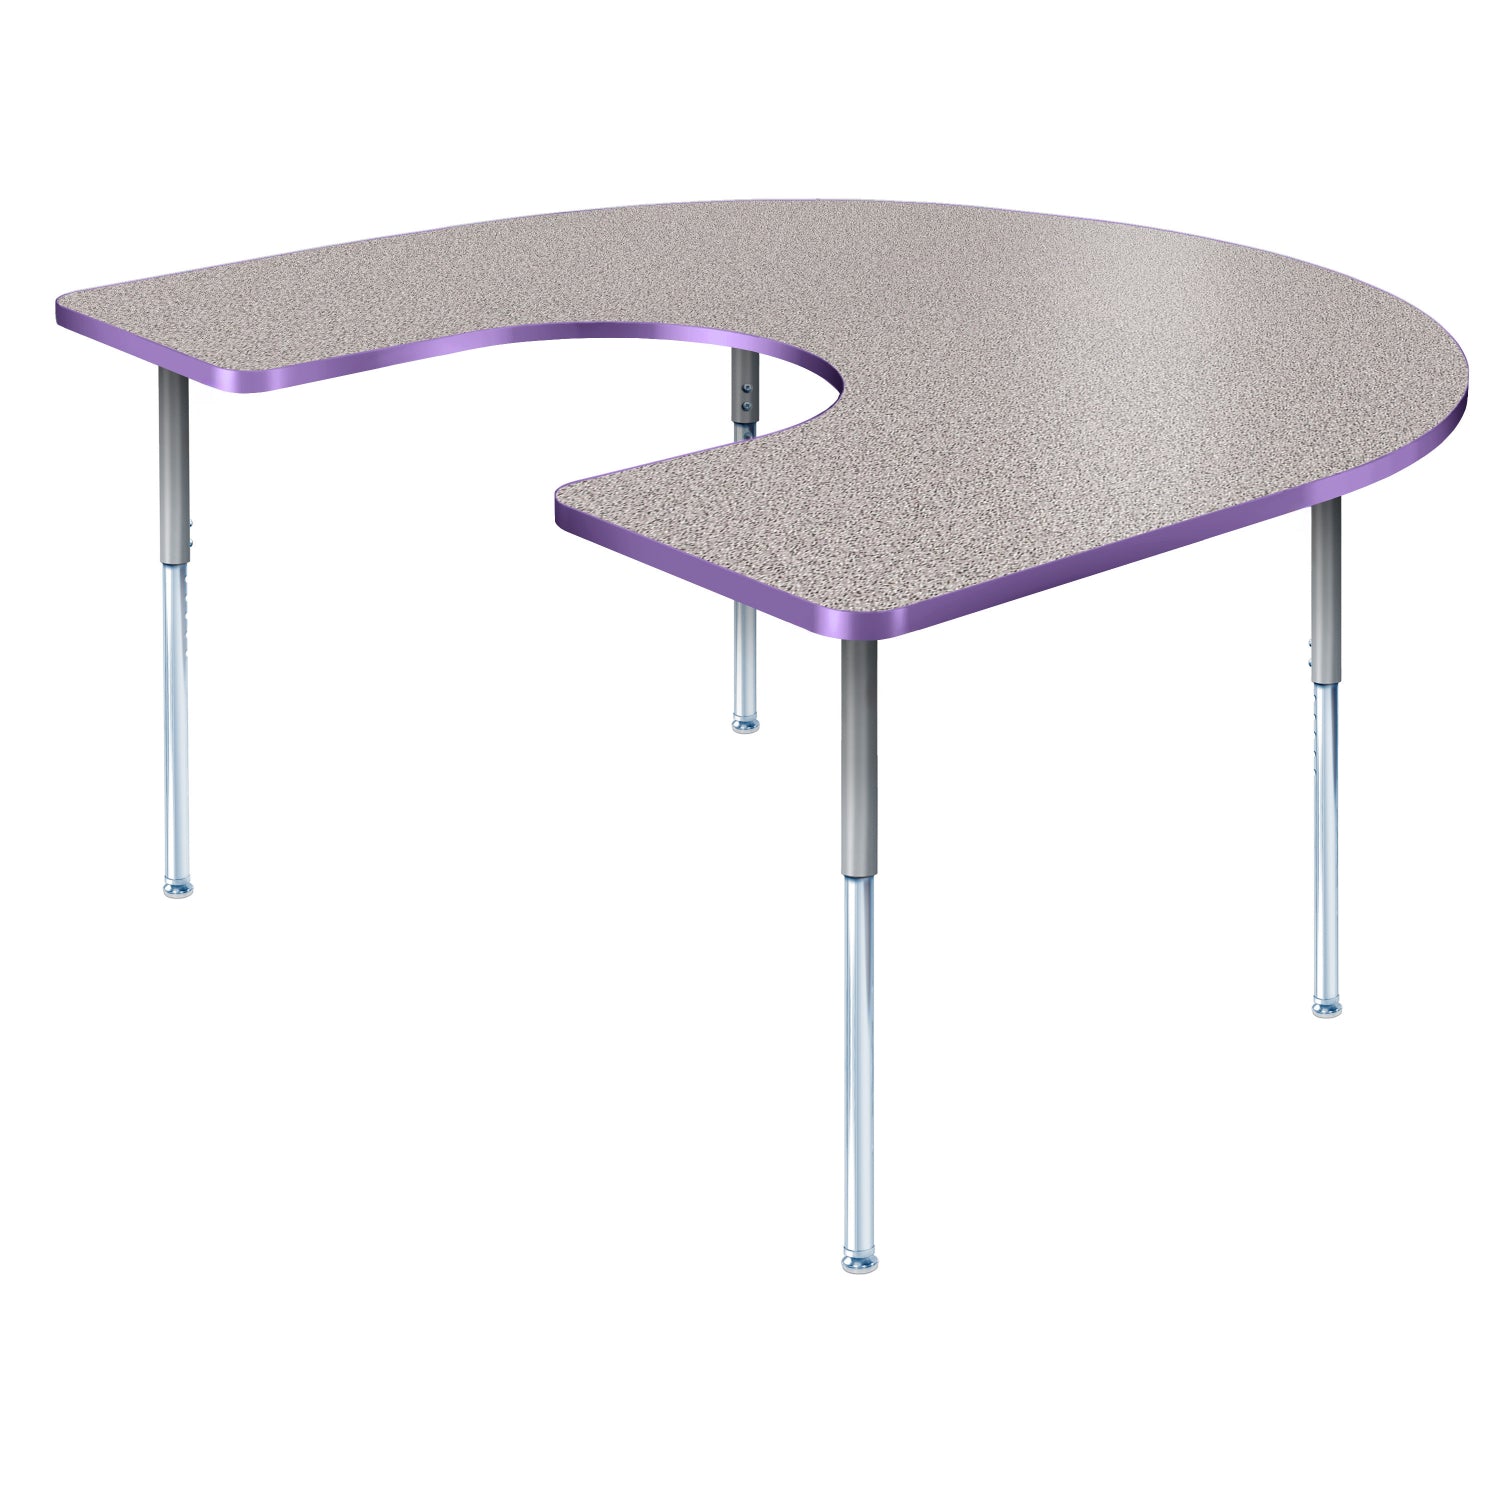 Modern Classic Series 60 x 66" Horseshoe Activity Table with High Pressure Laminate Top, Adjustable Height Legs